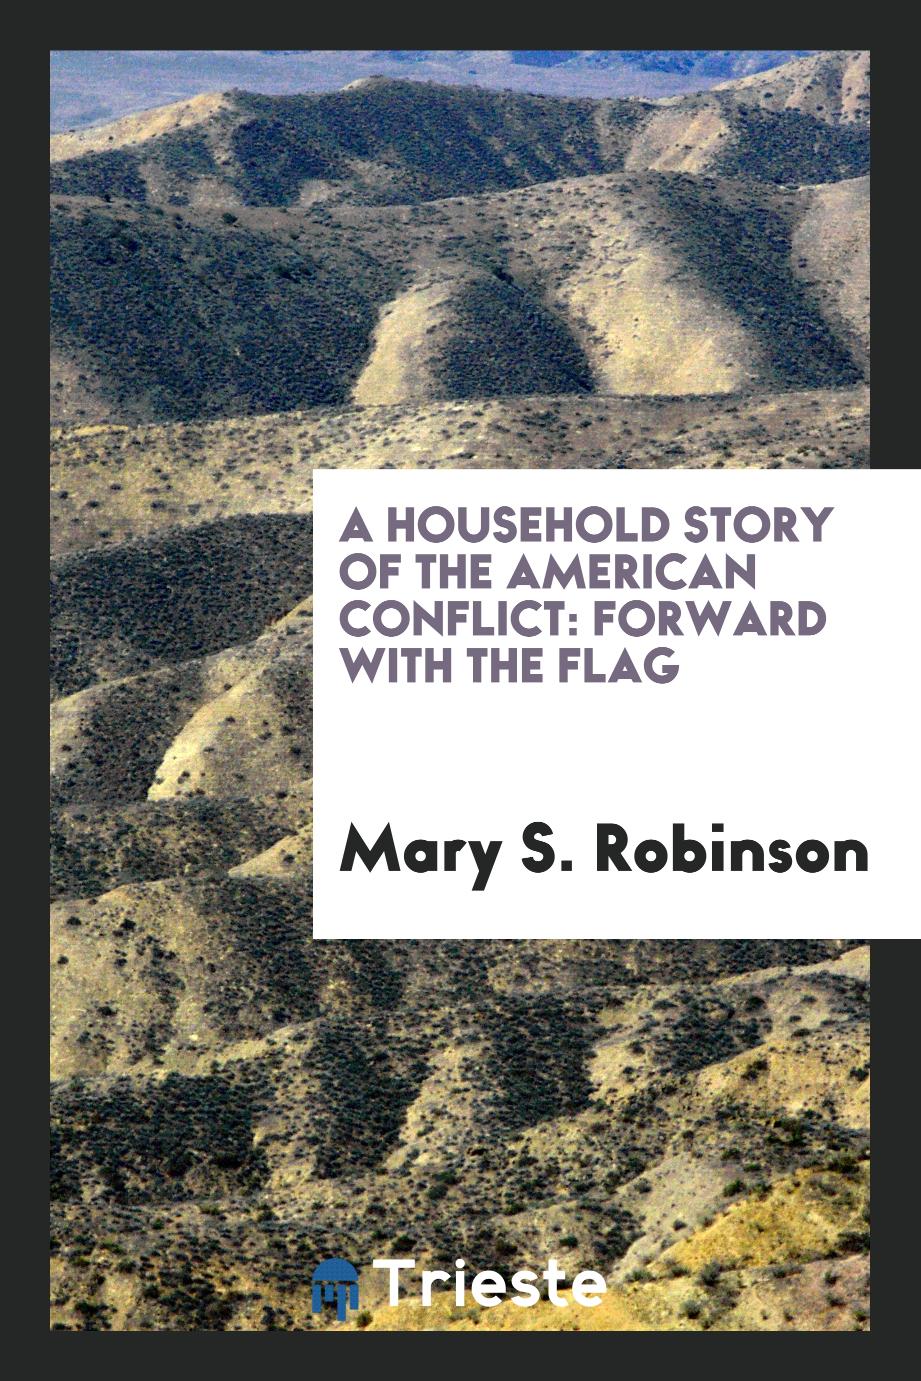 A household story of the American conflict: forward with the flag